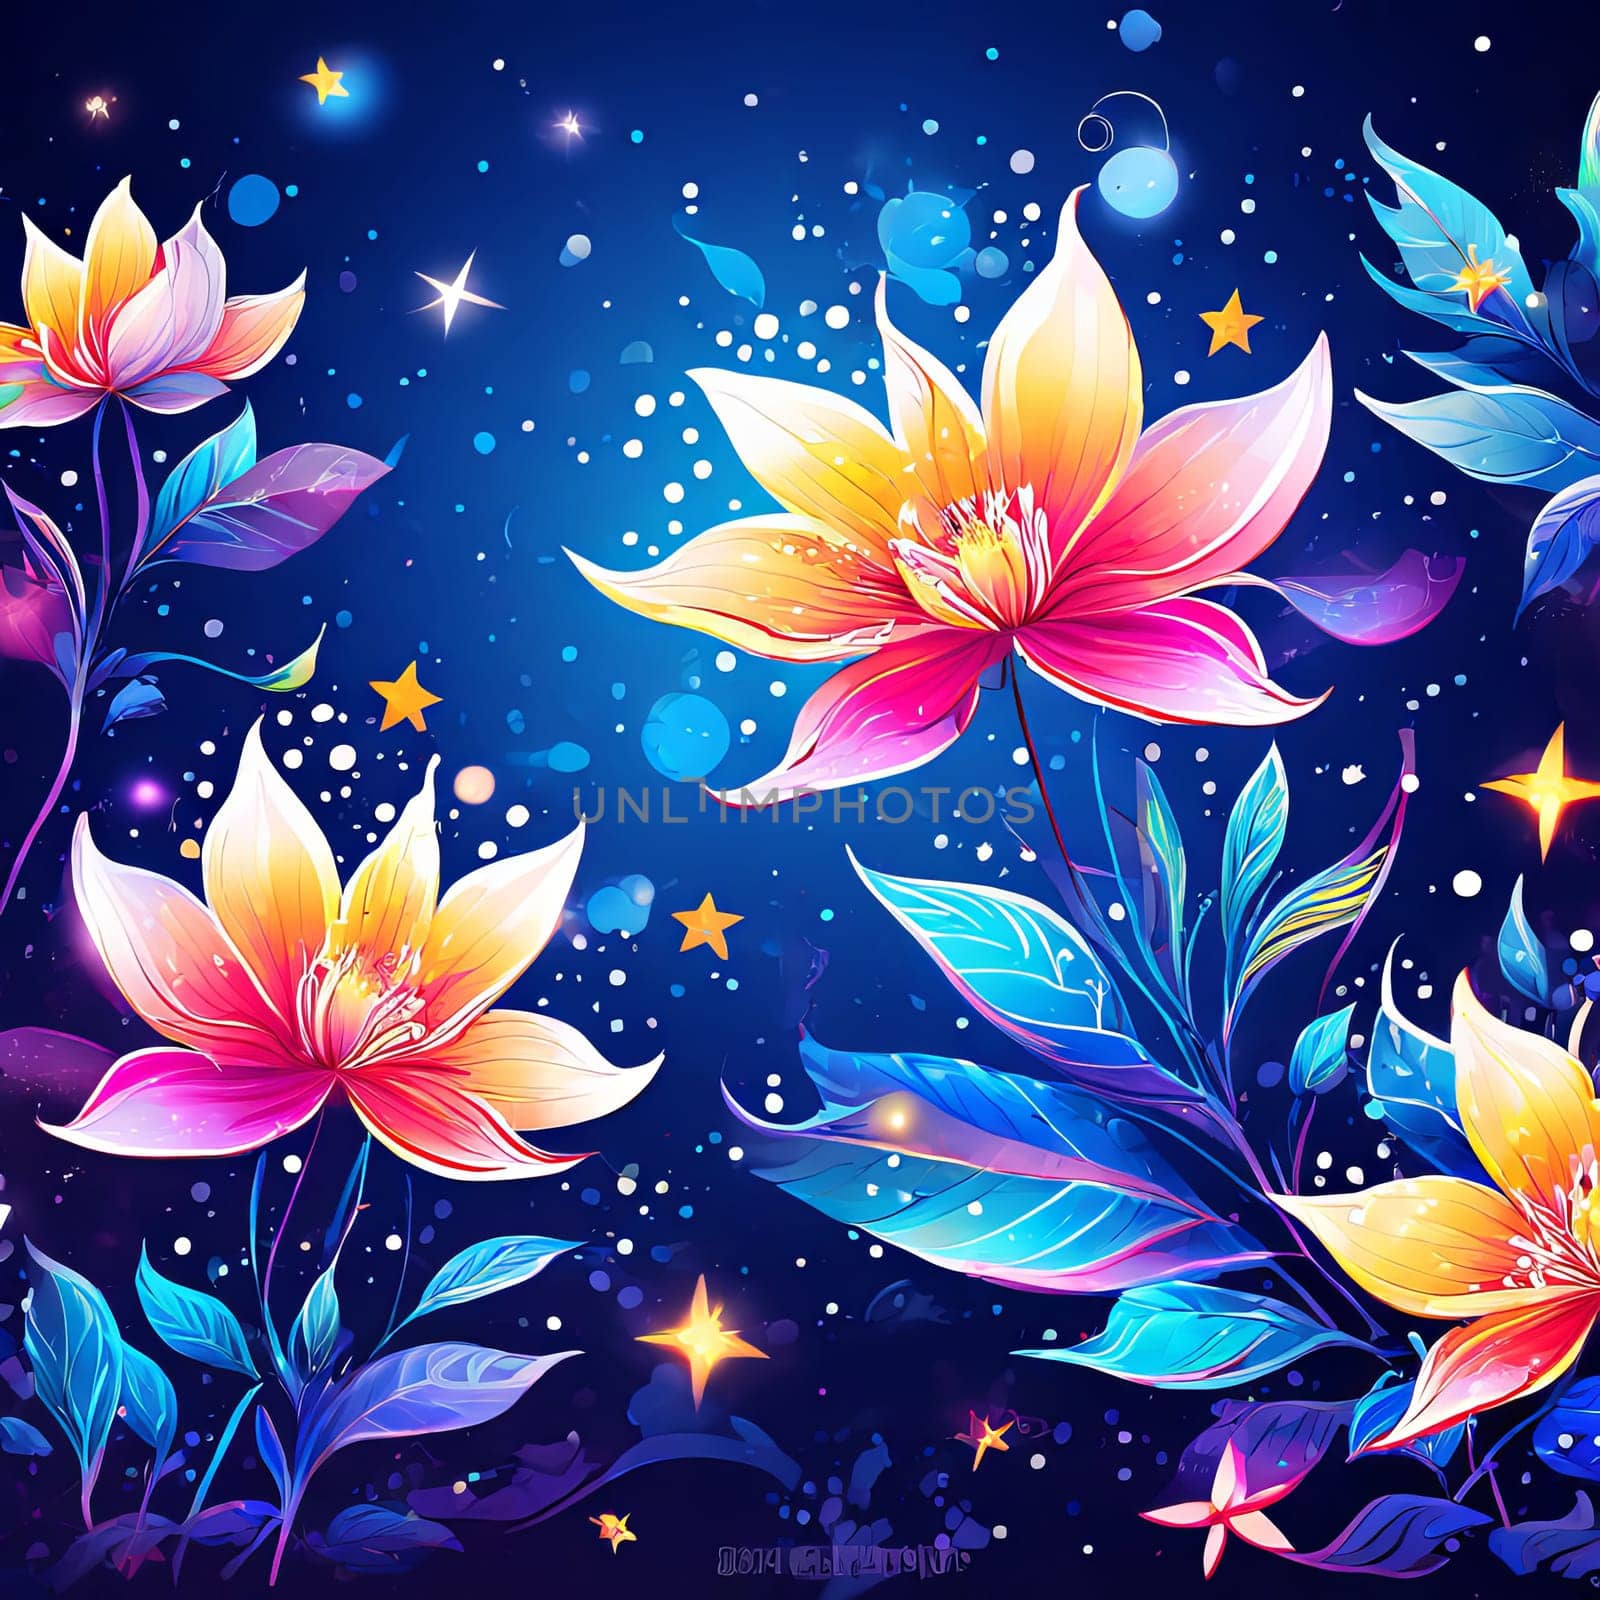 Serene lotus flowers on blue background adorned with stars. Starry background adds sense of mystery, magic to overall impression of image. For art, creative projects, fashion, style, social media. by Angelsmoon